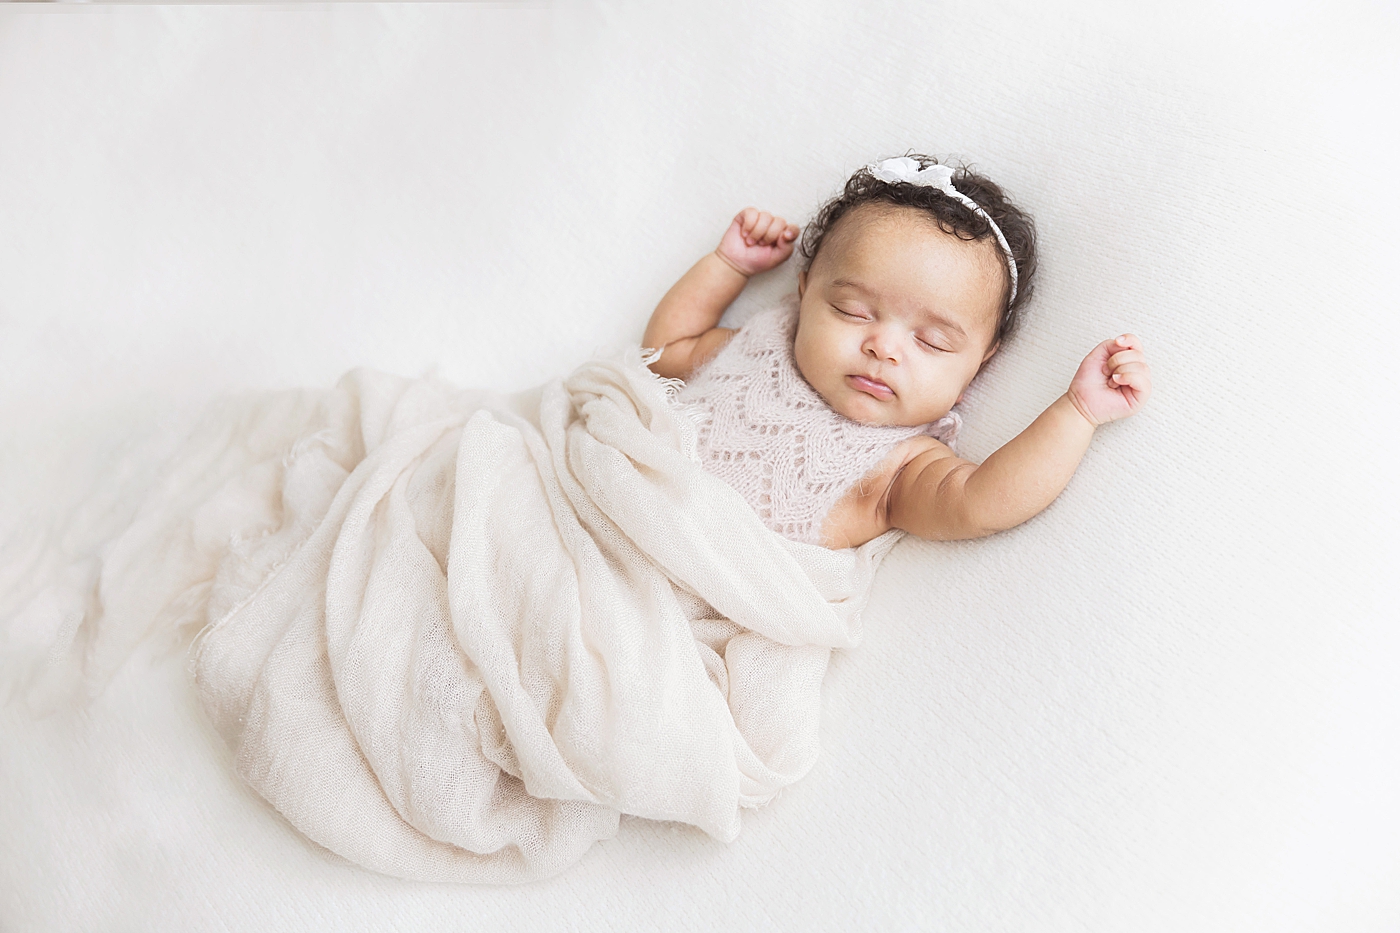 Baby girl laying with arms up. Photo by Fresh Light Photography.